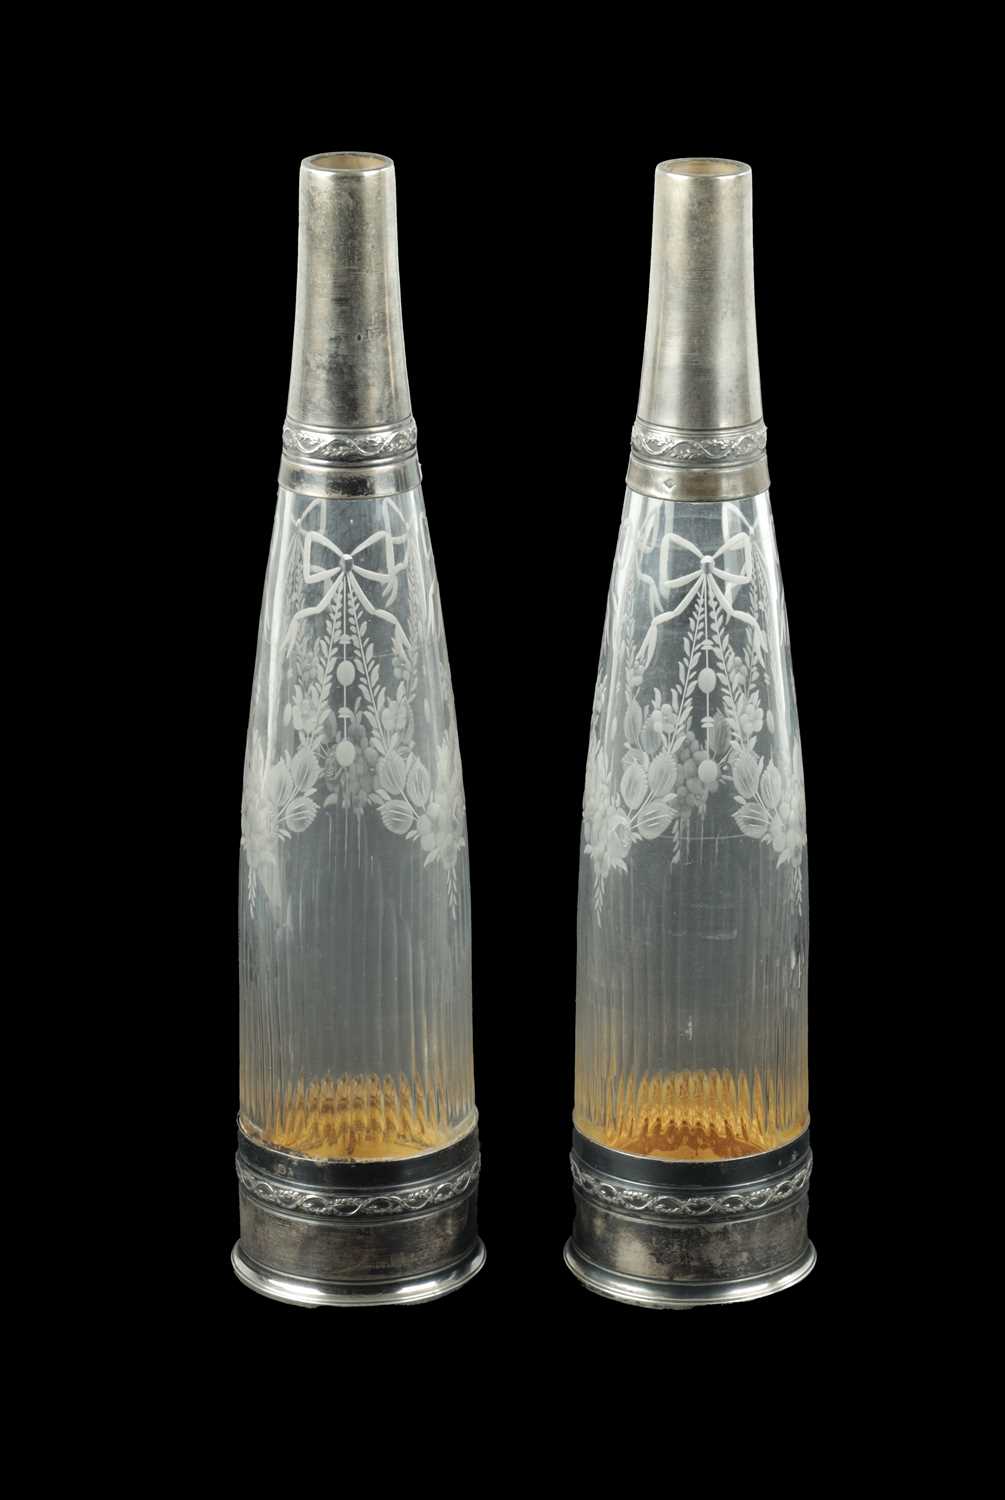 Lot 724 - A PAIR OF FRENCH SILVER TOPPED AND CUT GLASS DECANTER BOTTLES